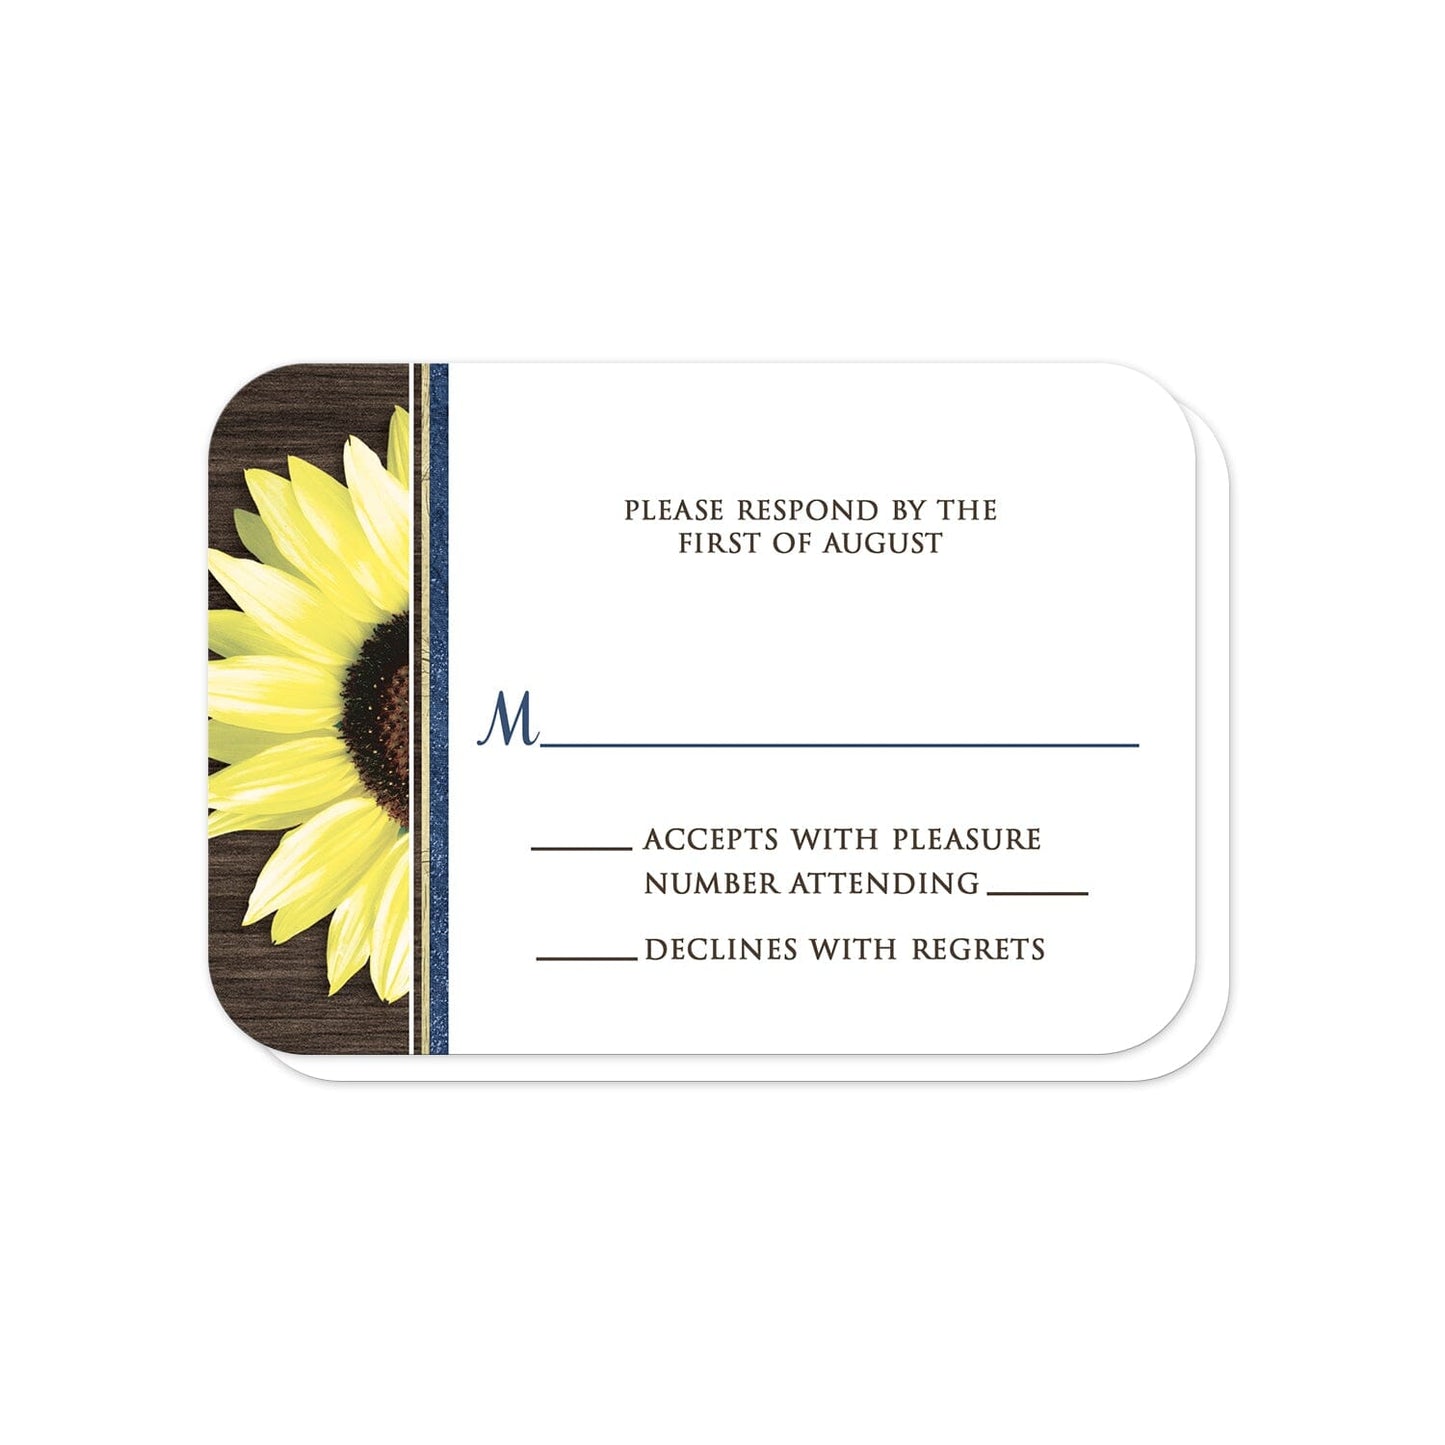 Rustic Sunflower with Blue RSVP Cards (with rounded corners) at Artistically Invited.